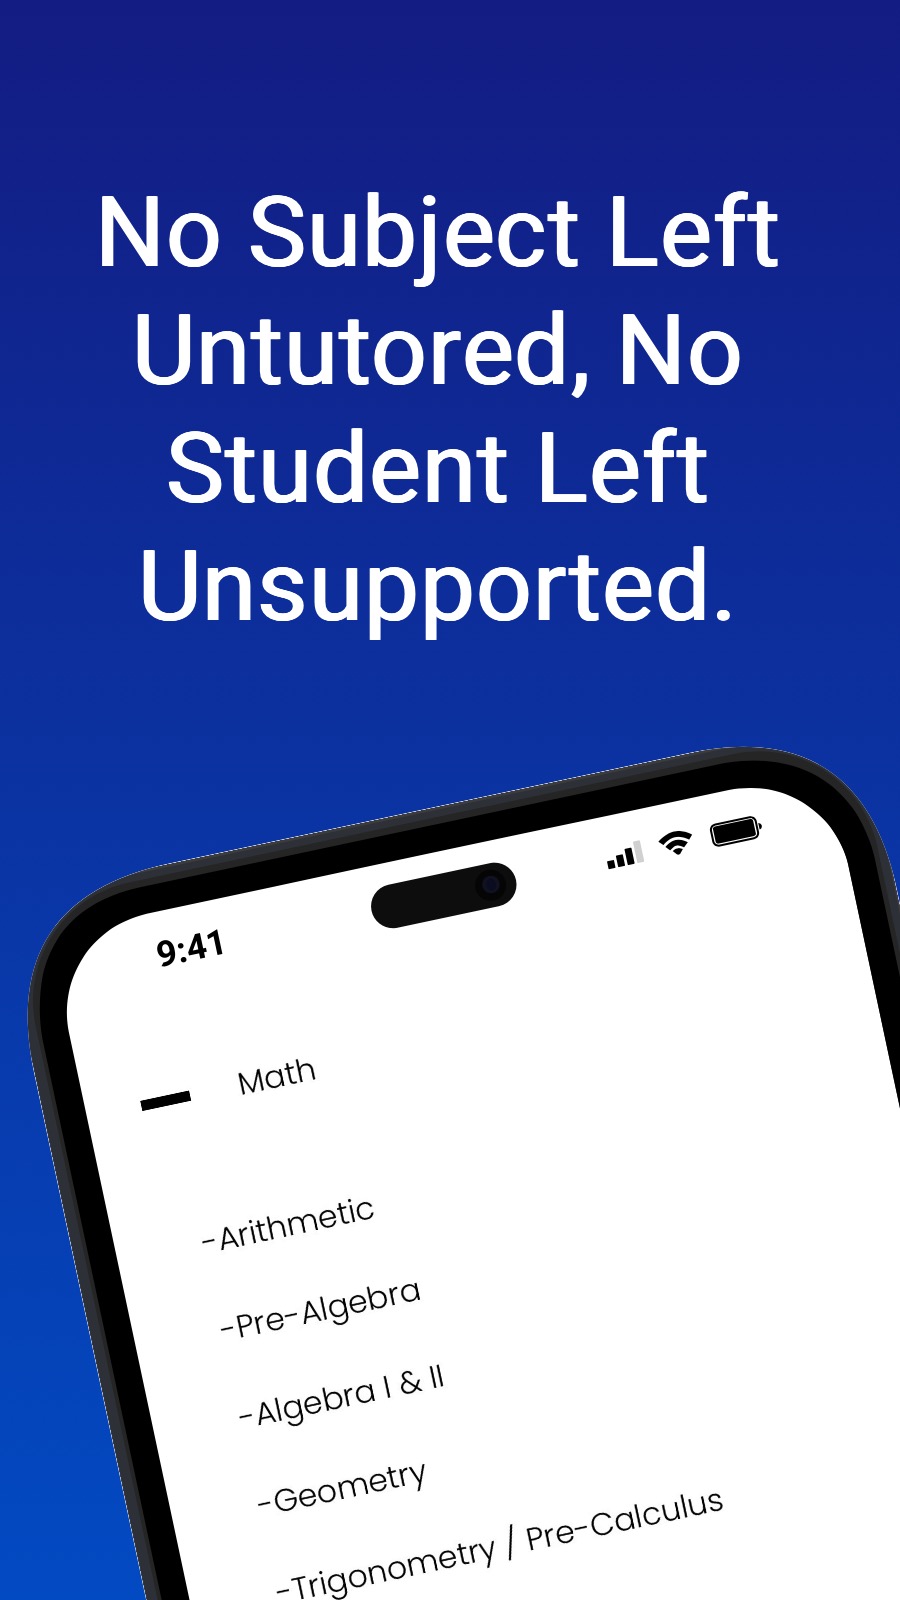 No Subject Left Untutored, No Student Left Unsupported.